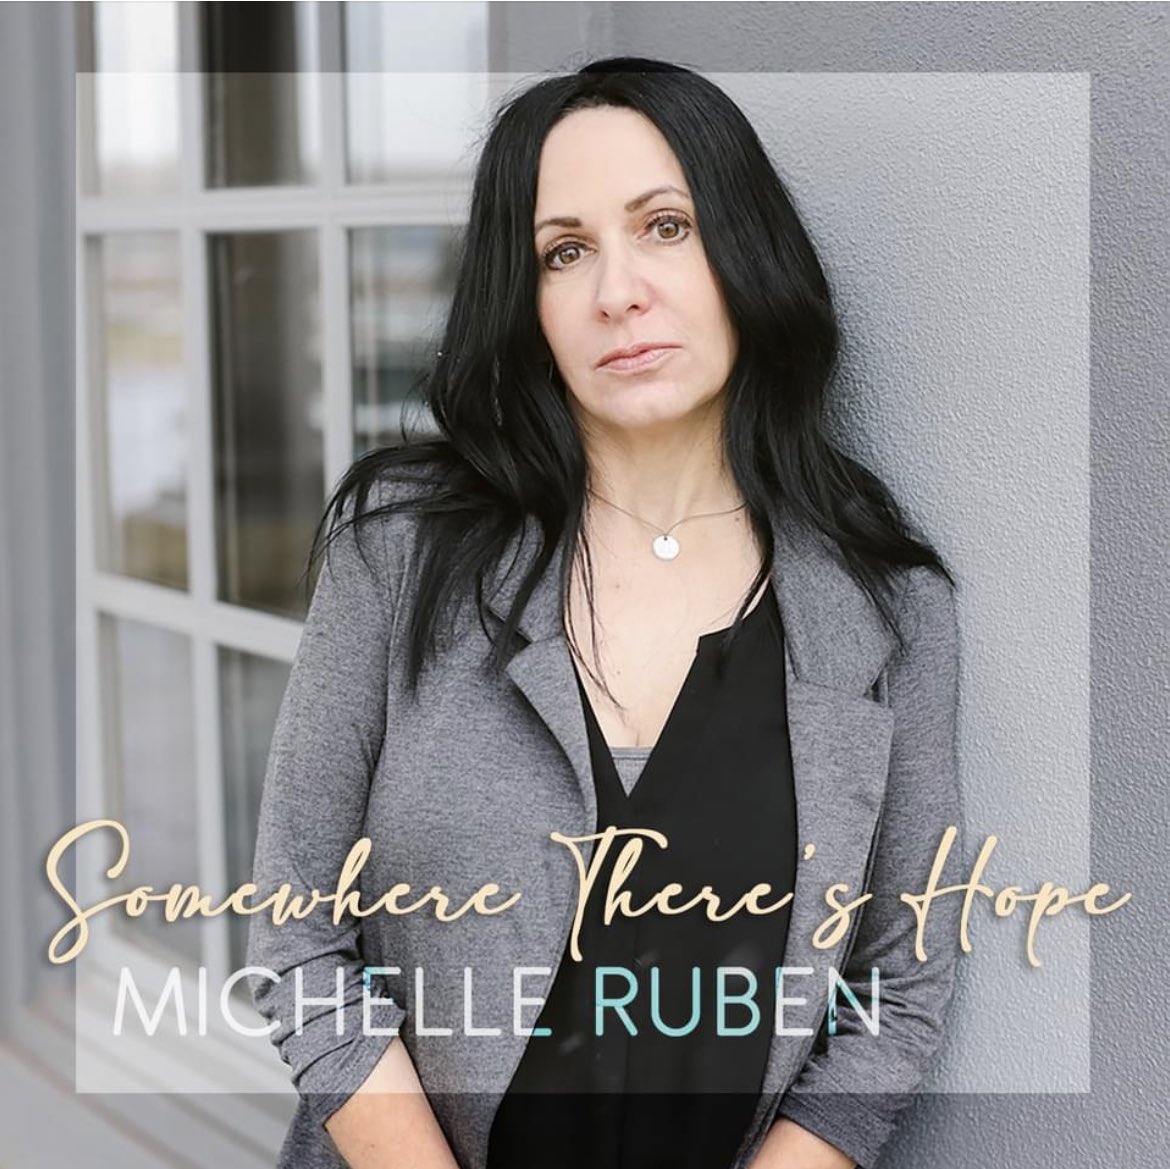 Super excited about my new single 'Somewhere There's Hope'. Now available on Apple Music! Music video is coming soon! Lots more music happening with @creativesoulrecords #steveperry #steveperrymusic #singersongwriter #popmusic @StevePerryMusic 

apple.co/3oHbQQE